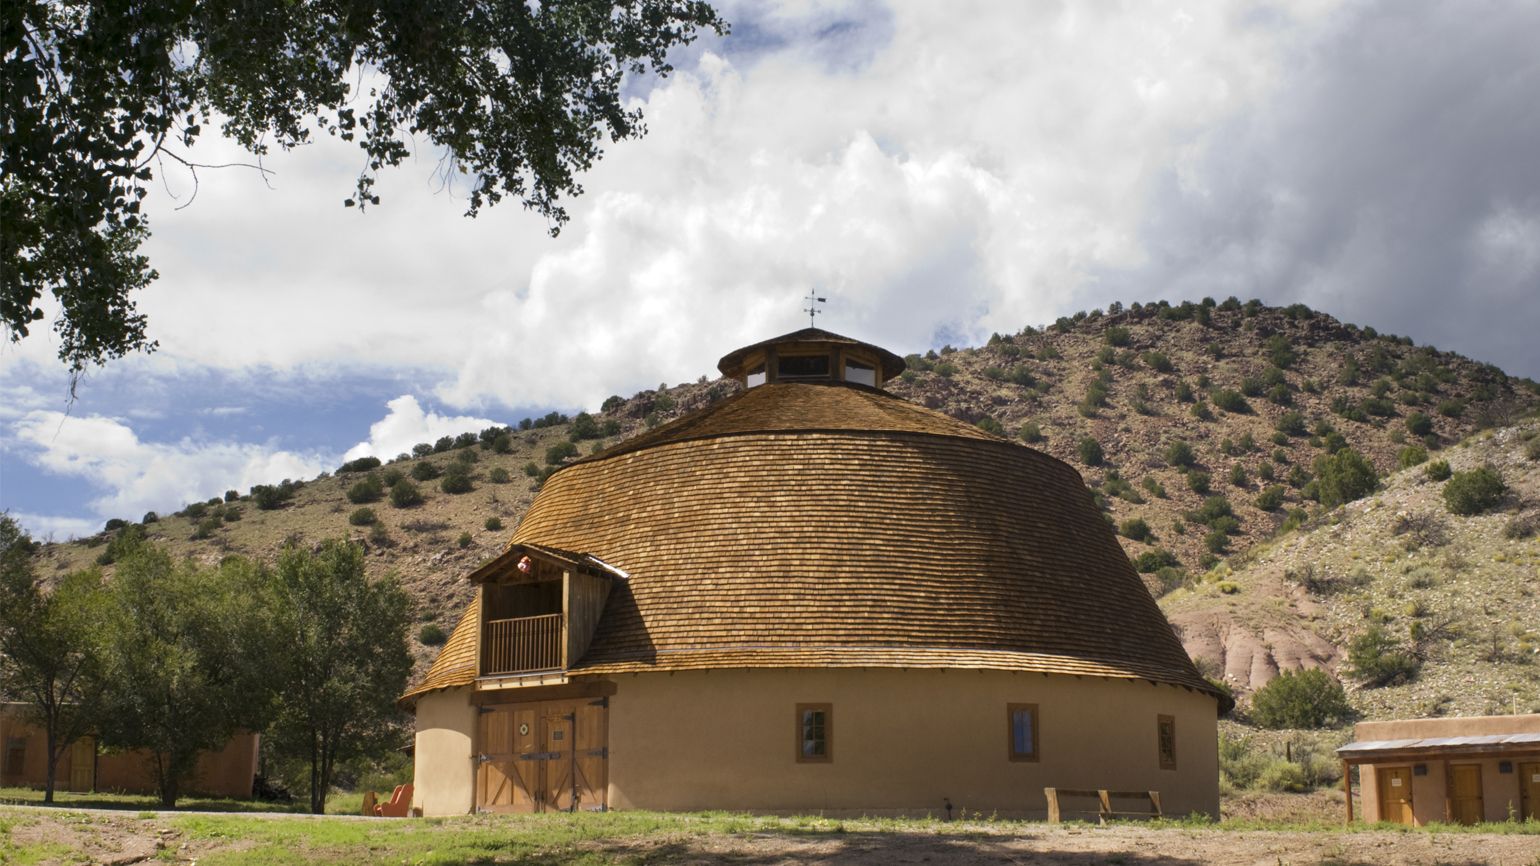 The round barn at Ojo Caliente Mineral Springs was built in 1924. It is the only round barn in New Mexico and possibly the only remaining adobe round barn in the United States. It was added to the National Register of Historic Places in 1985.